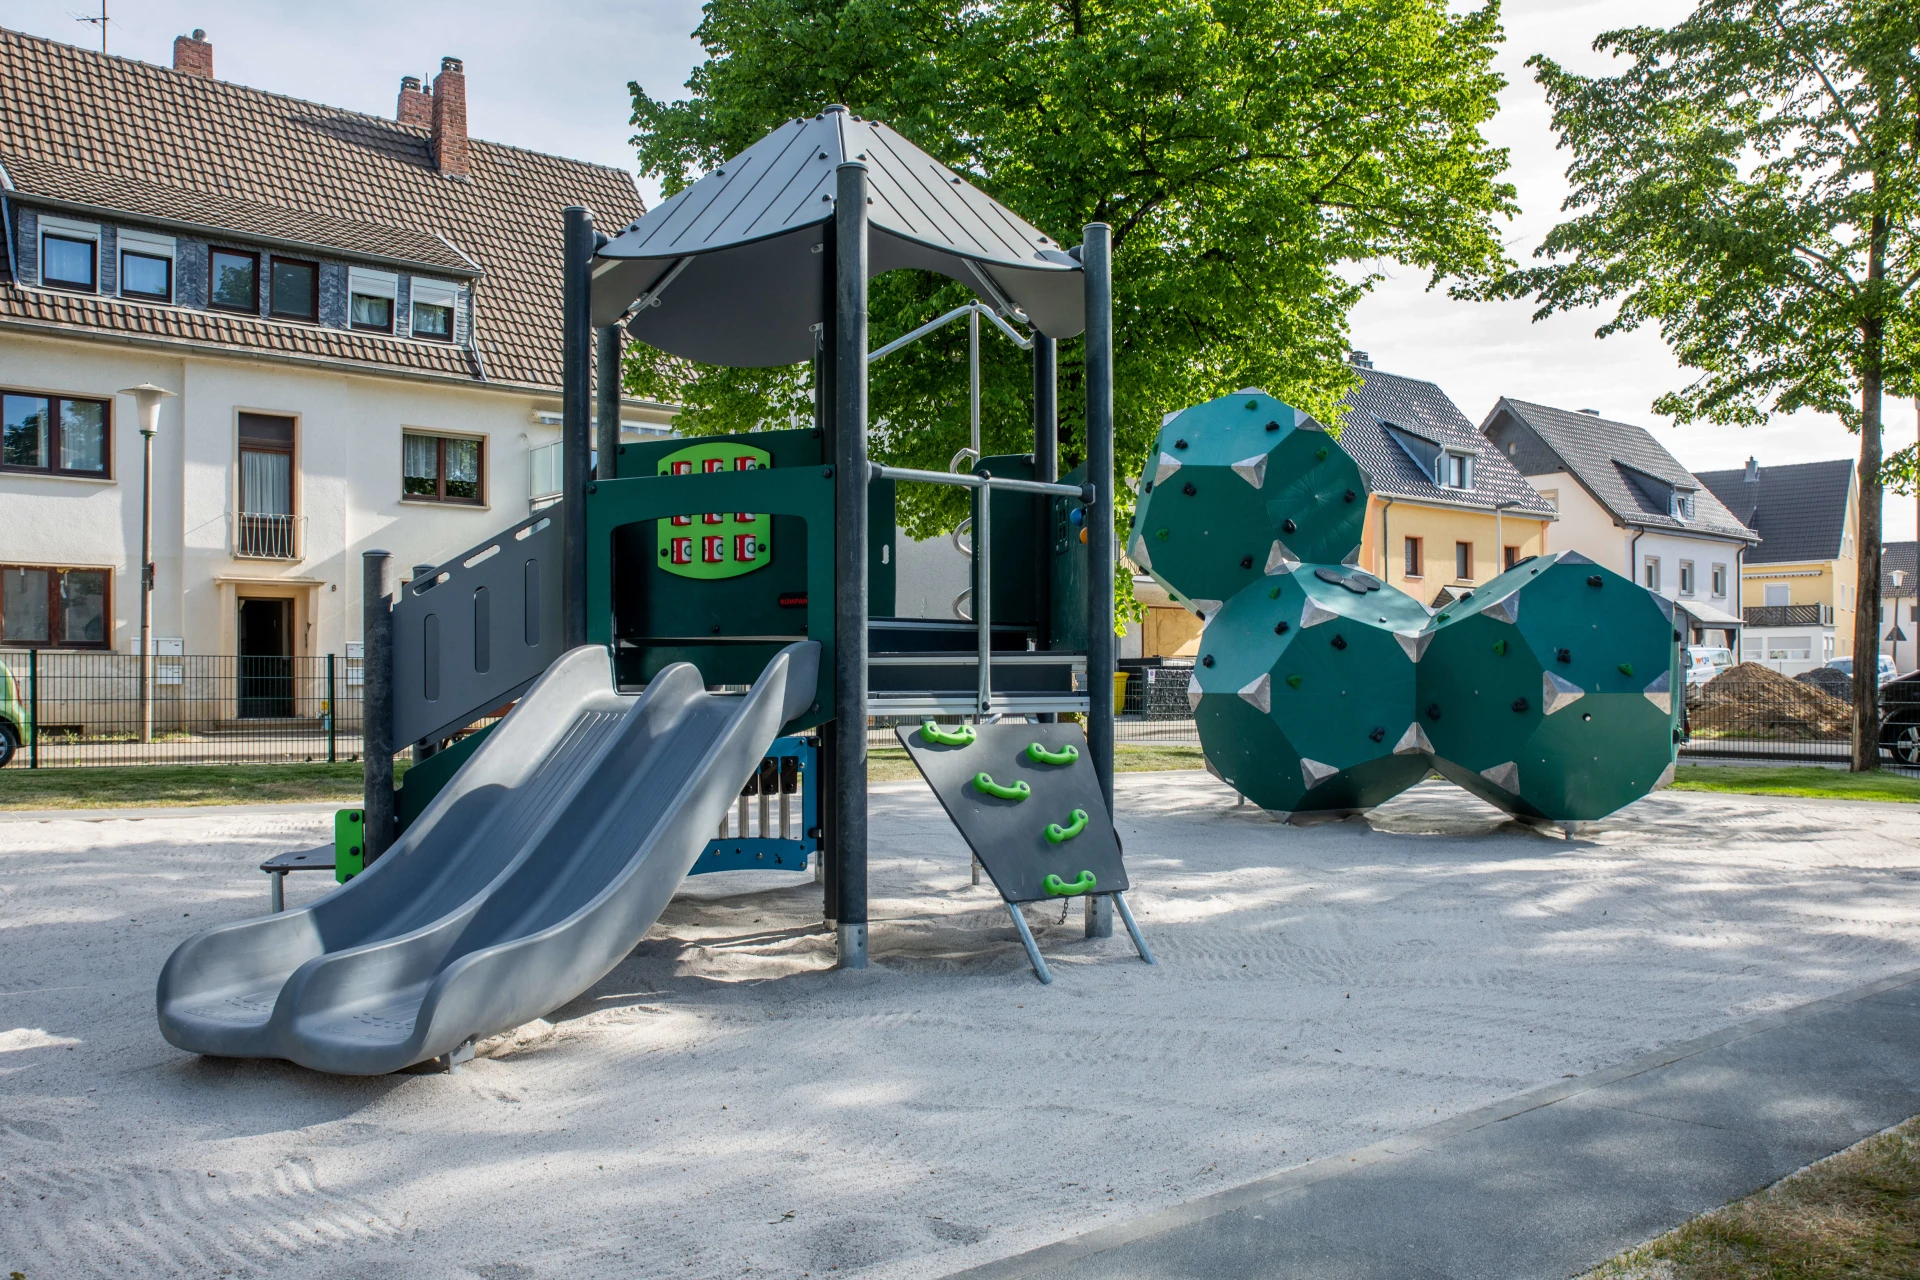 Playground made of recycled post-consumer waste after flooding at Bad Neuenahr-Ahrweiler